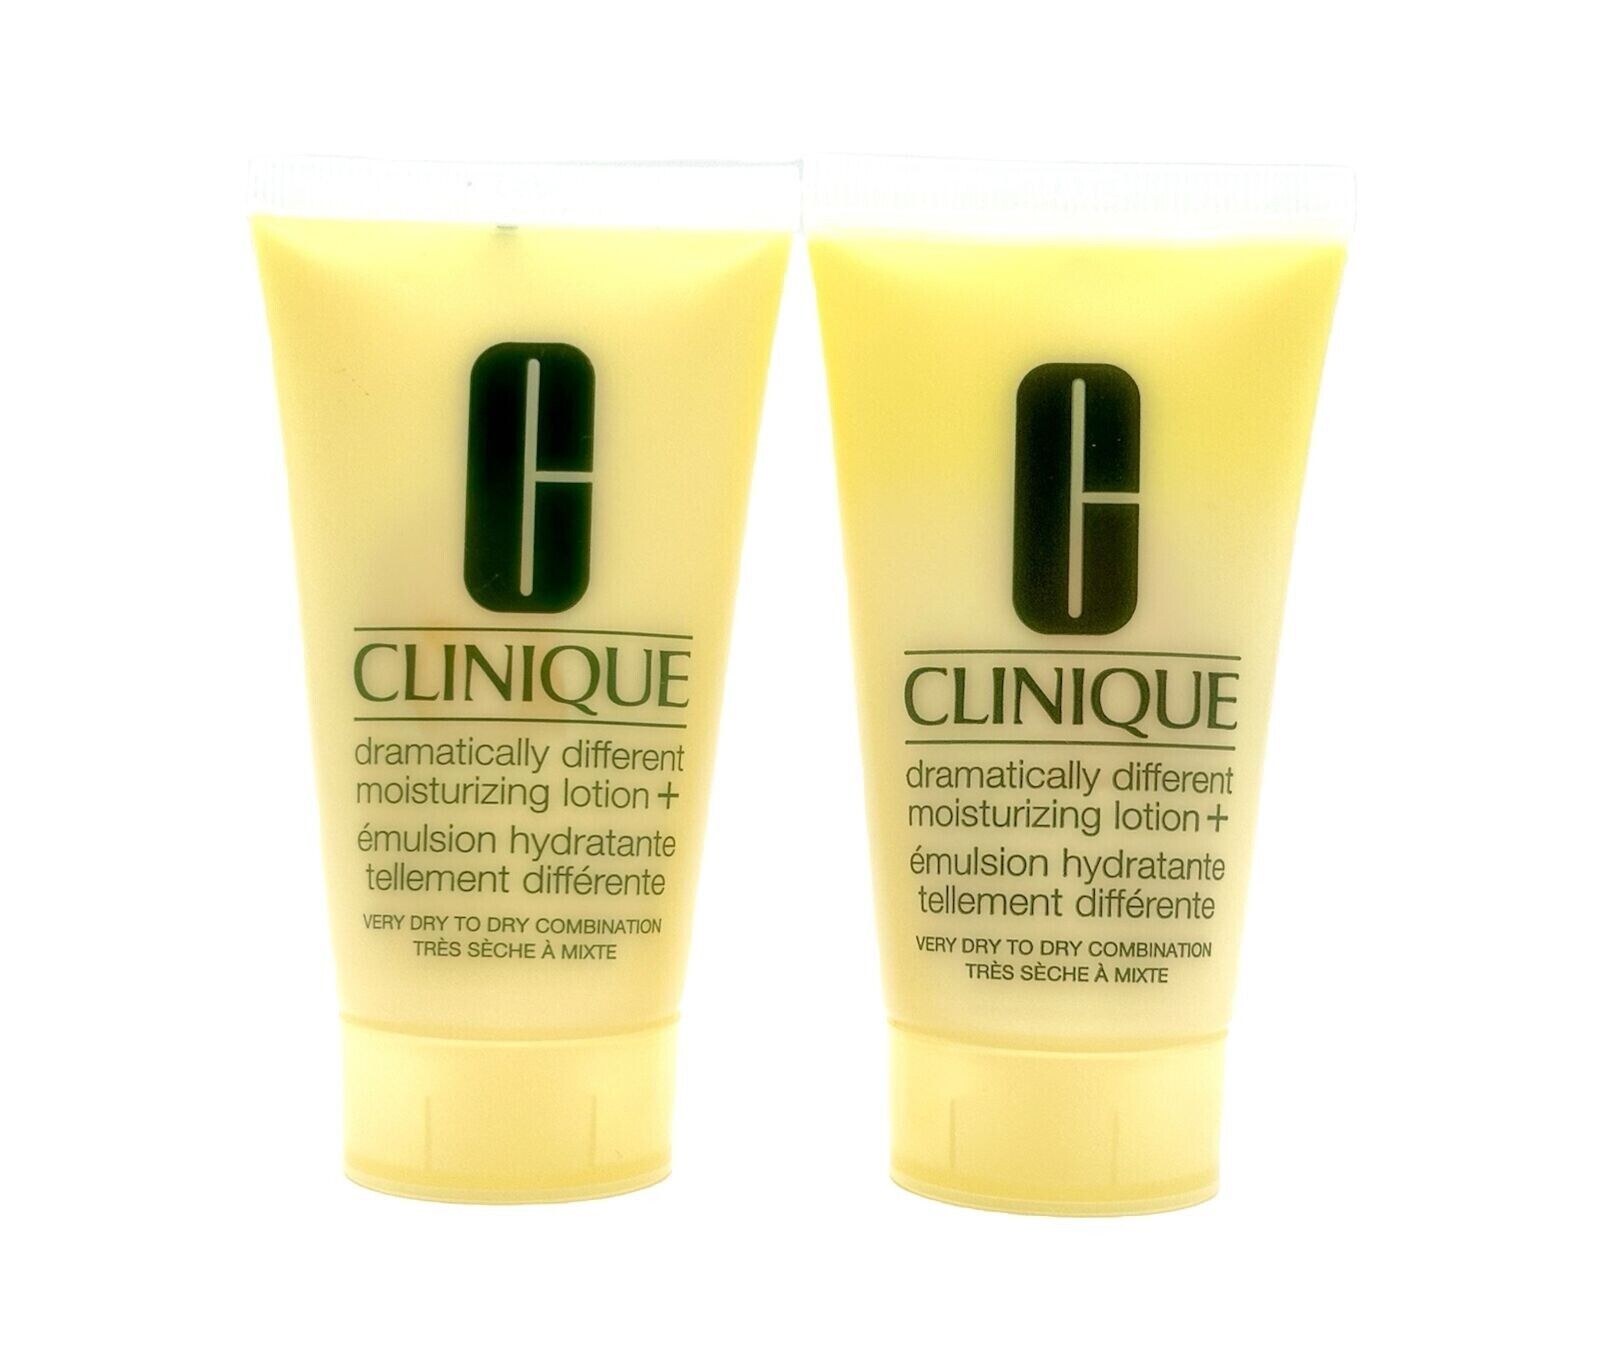 Lot of 2 Clinique Dramatically Different Moisturizing Lotion+ Tube 1.7 oz/50 ml